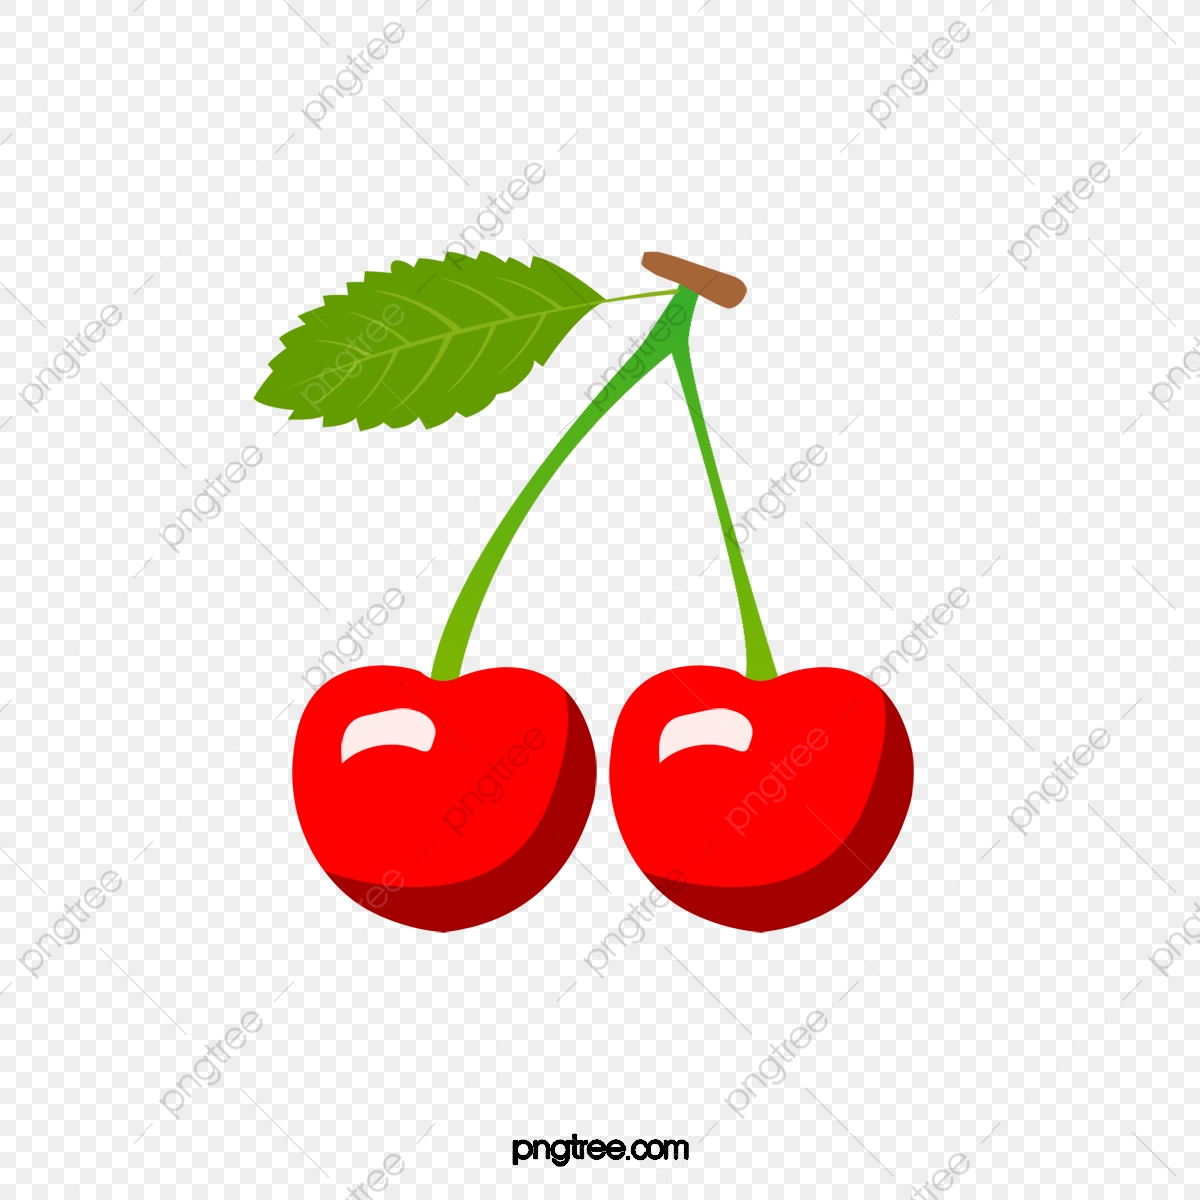 Cherry clipart file. Red cartoon fruit 